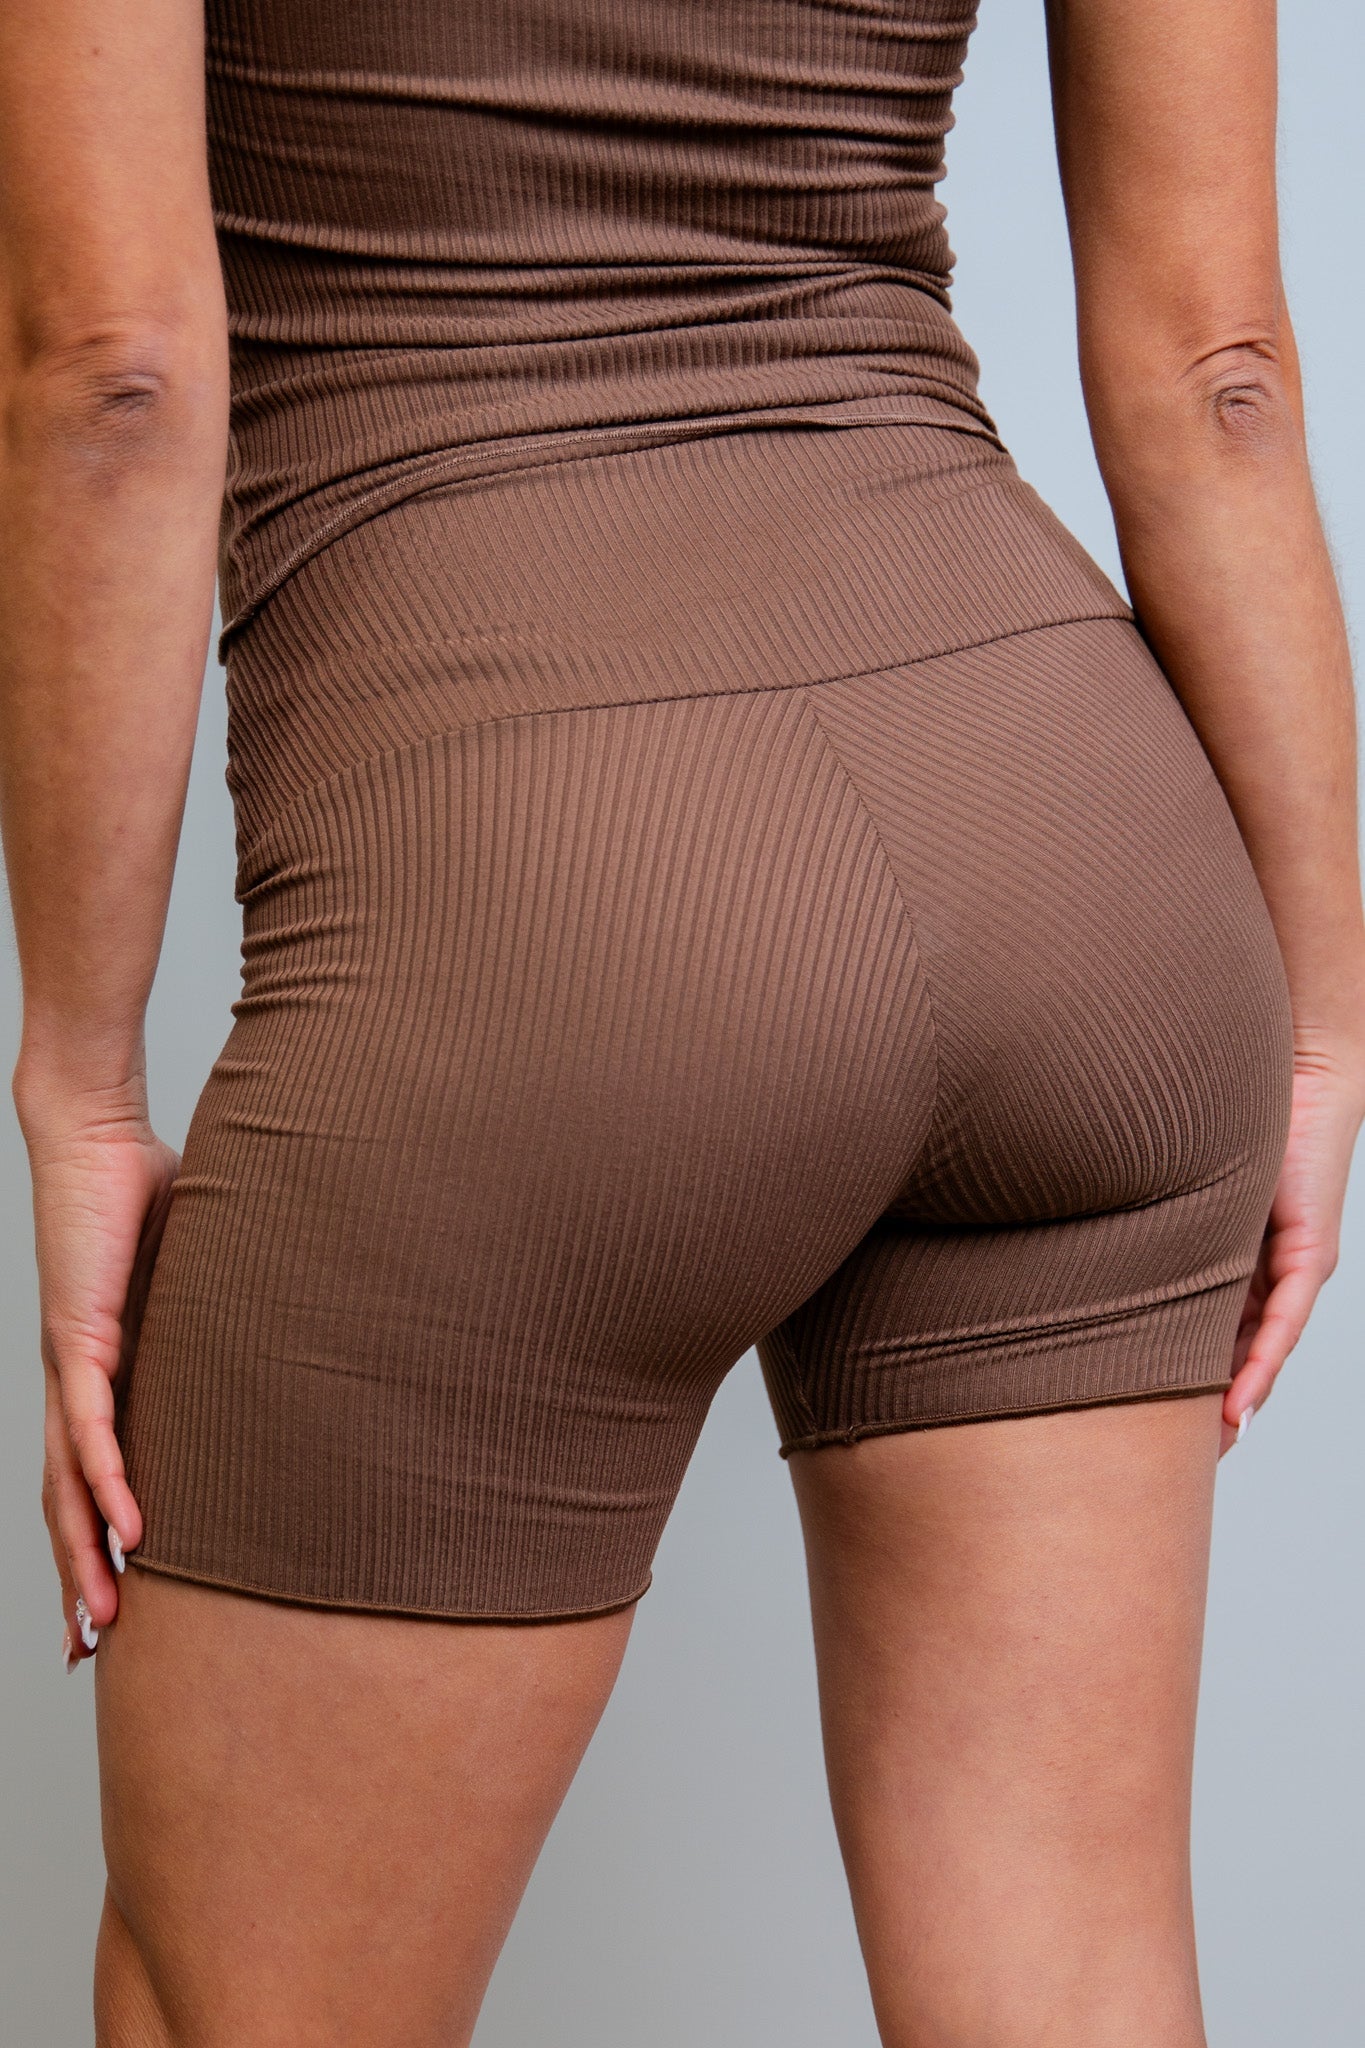 Brown Coco Ribbed Lounge Boxer Shorts - Freedom Rave Wear - Bottoms